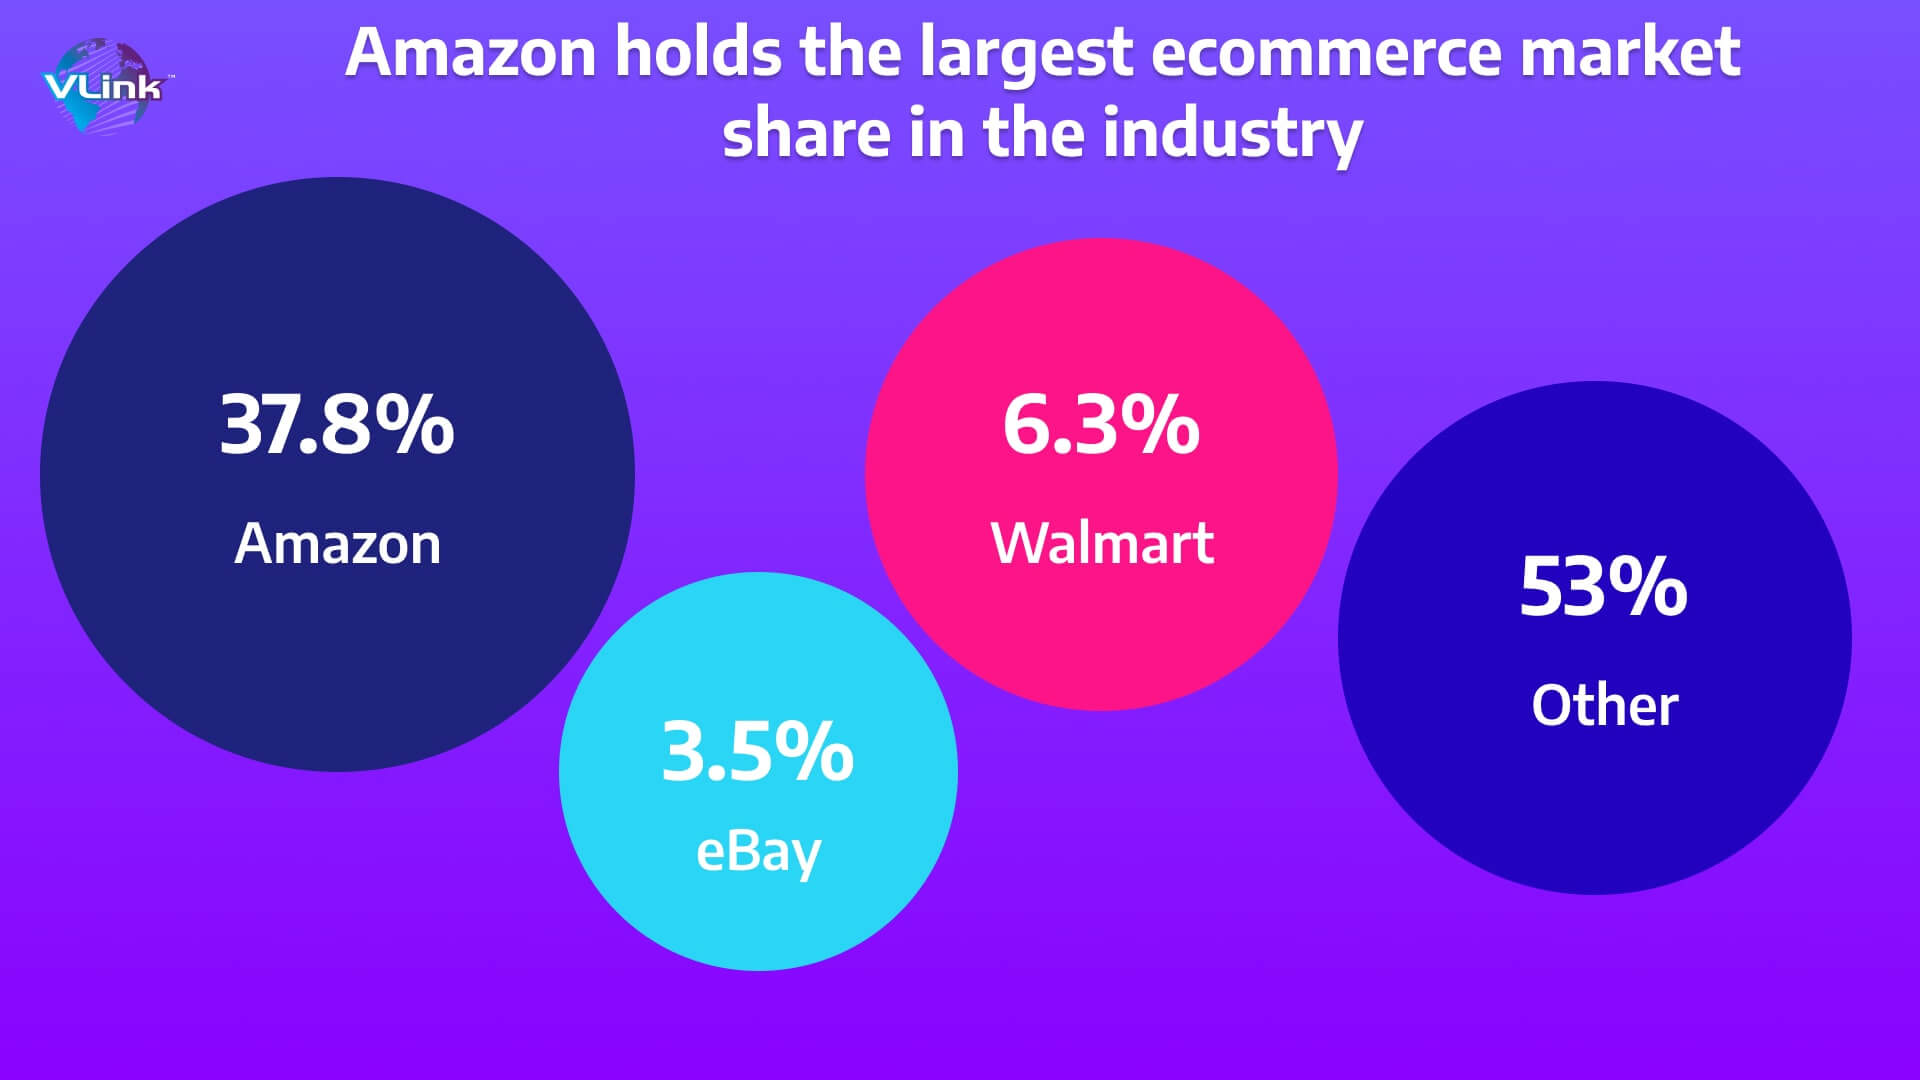 Amazon holds the largest ecommerce market share in the industry